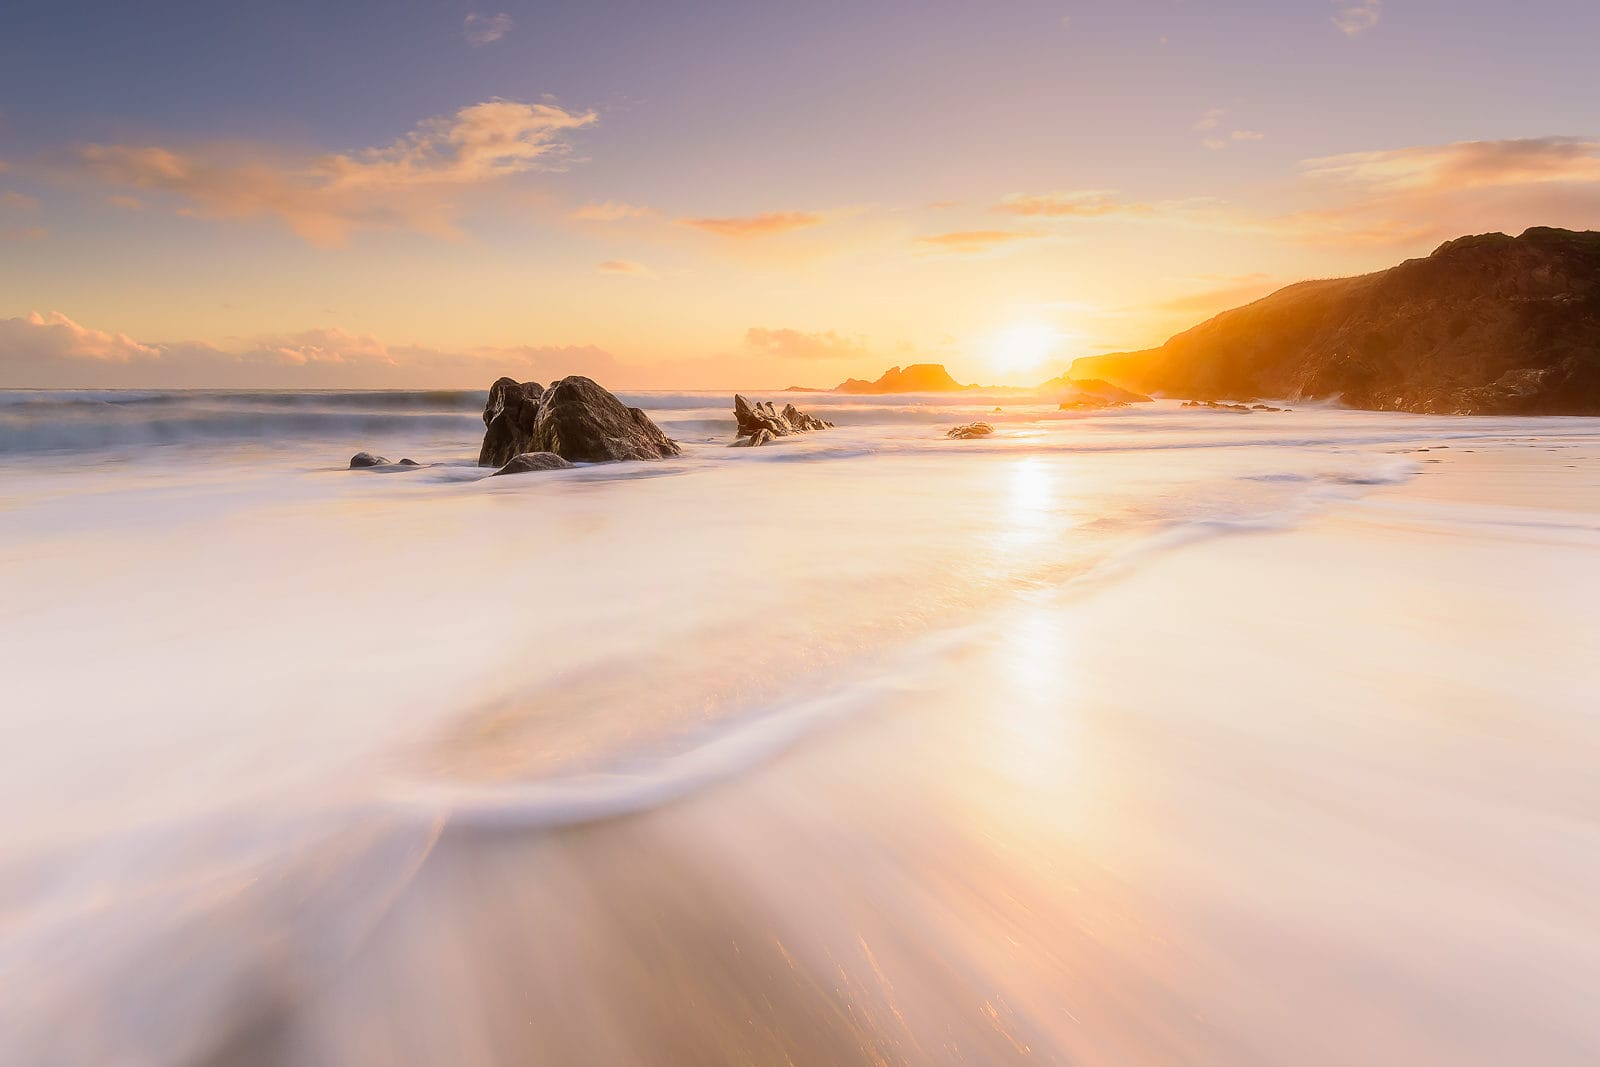 The sun is setting at Long Strand Beach in West Cork at one of my photography workshops locations